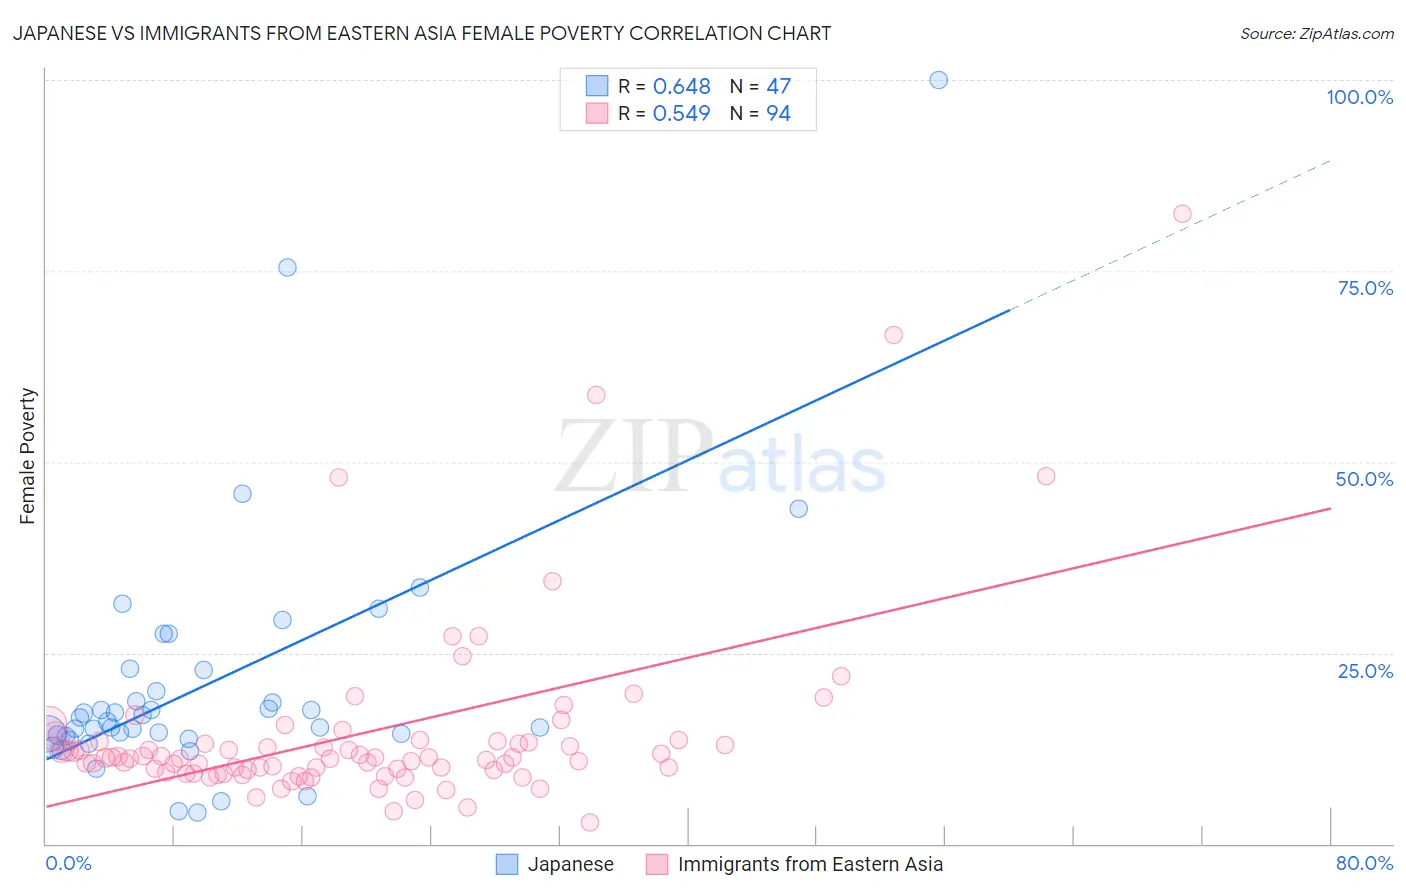 Japanese vs Immigrants from Eastern Asia Female Poverty